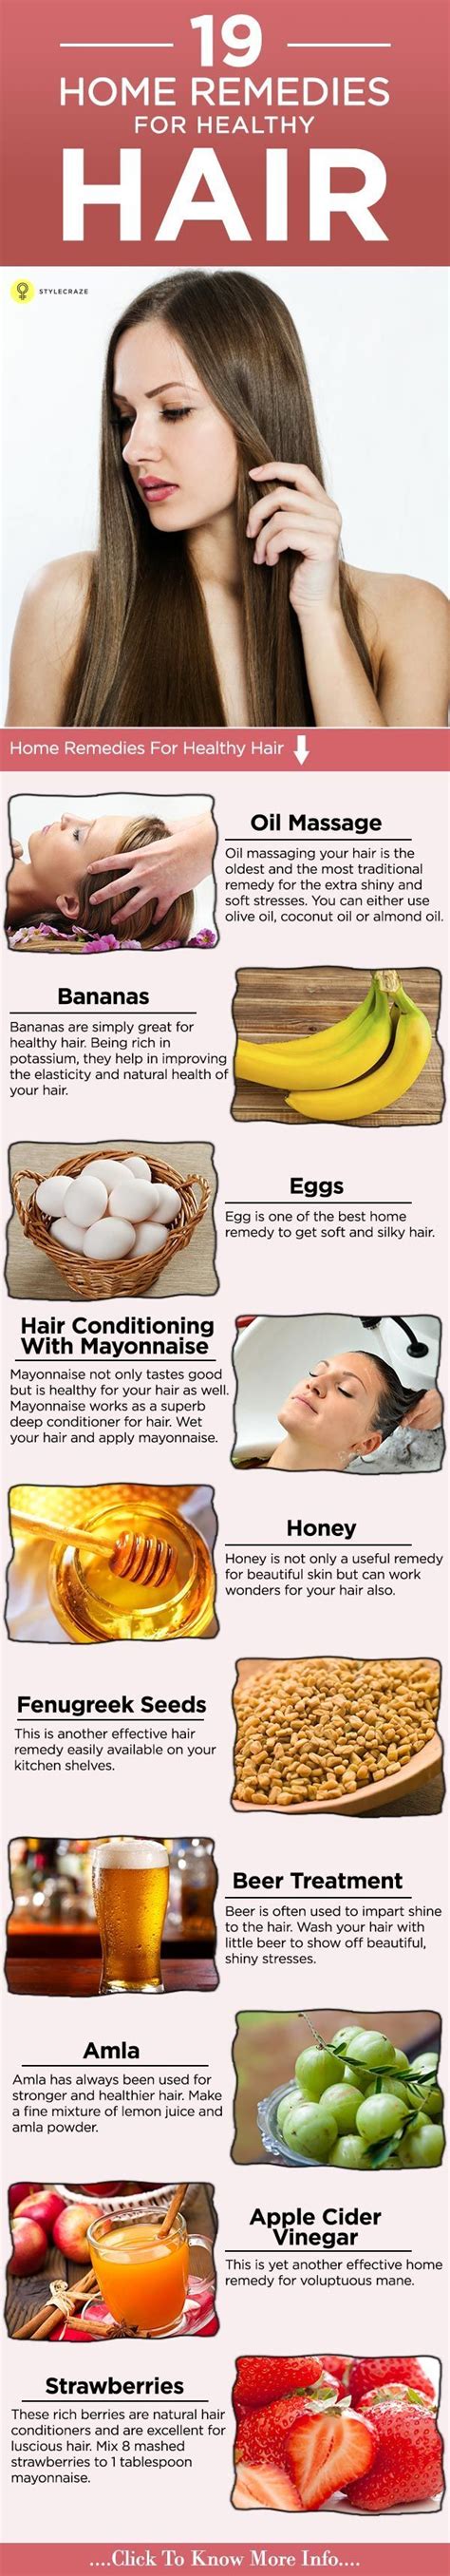 How To Keep Your Hair Healthy 20 Tips Home Remedies Healthy Hair